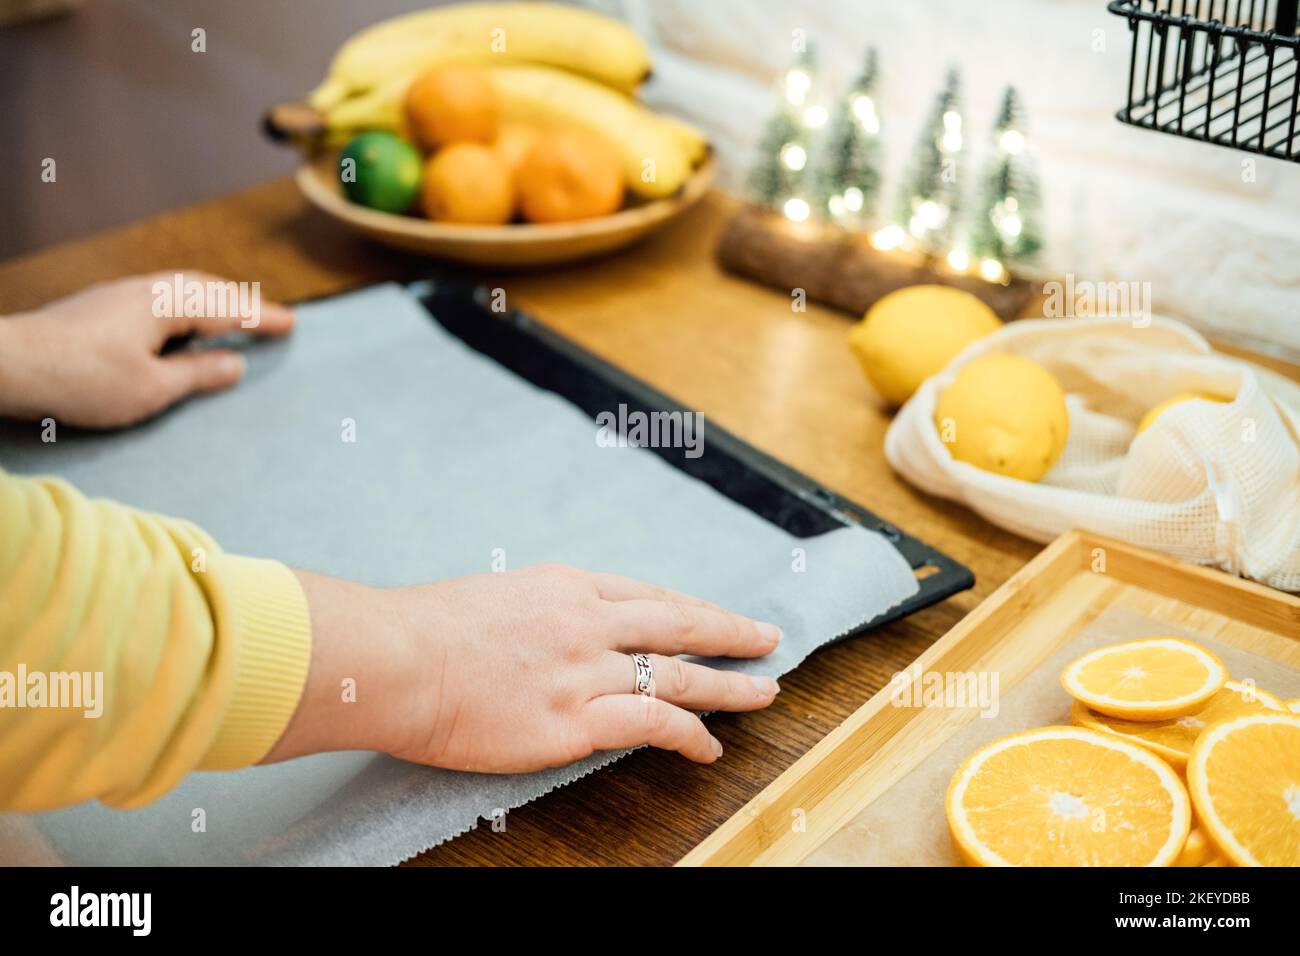 How to Dry Orange Slices for Eco friendly zero waste Holiday Decor. Close up Process of Drying Orange Slices in Oven. Woman cutting slices of orange Stock Photo